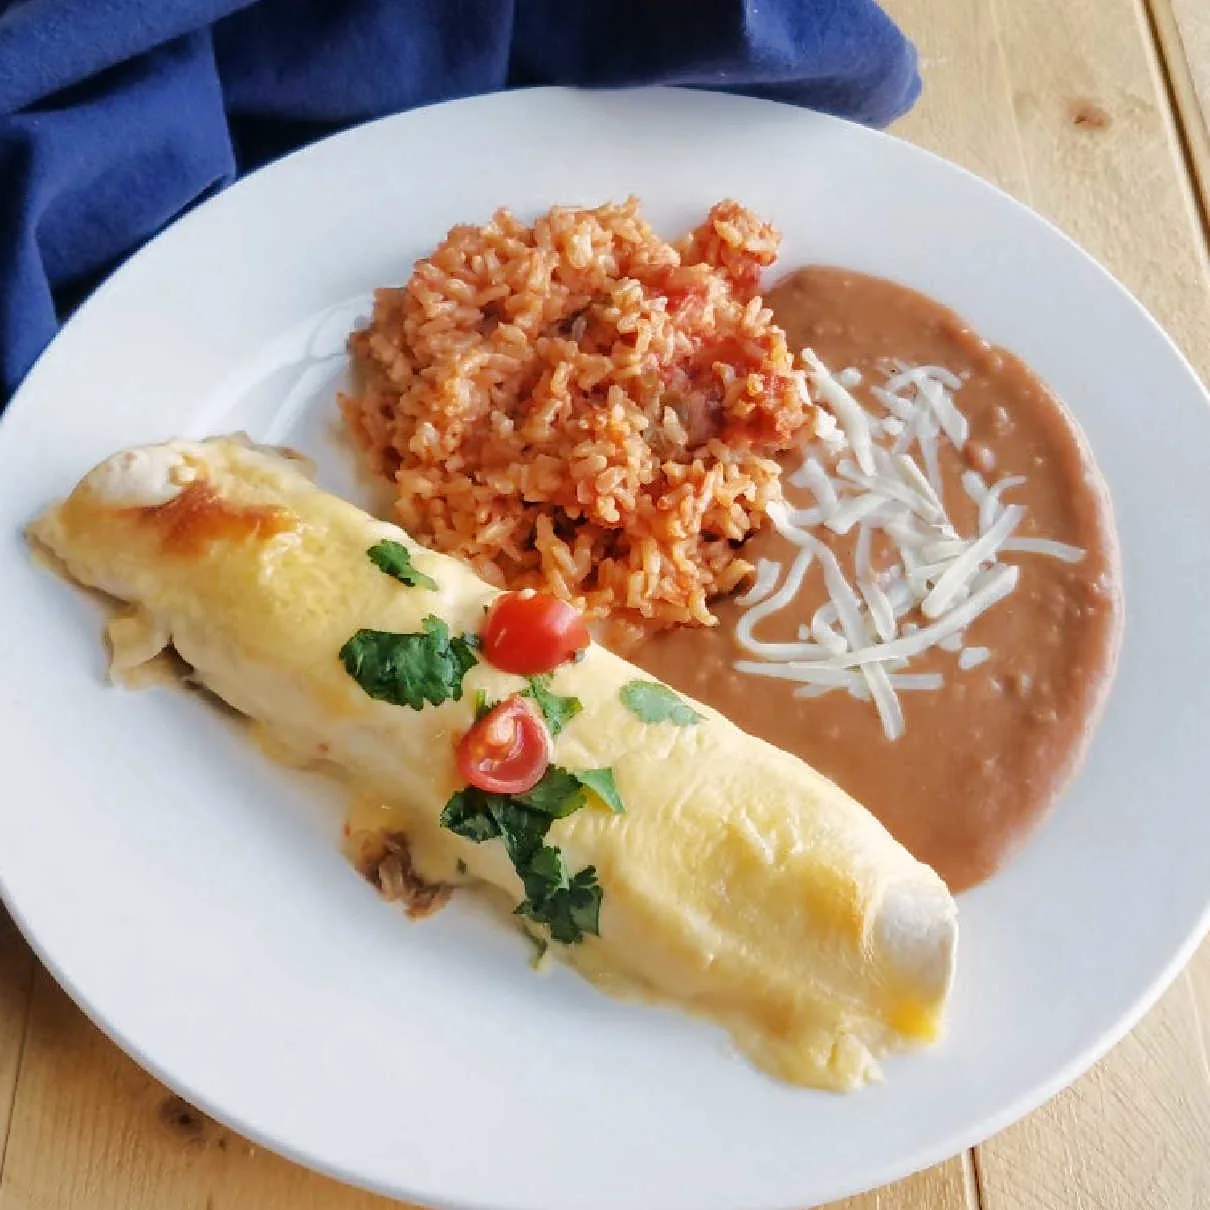 Creamy bbq pulled pork enchilada topped with cilantro and tomatoes served on plate with refried beans and spanish rice.